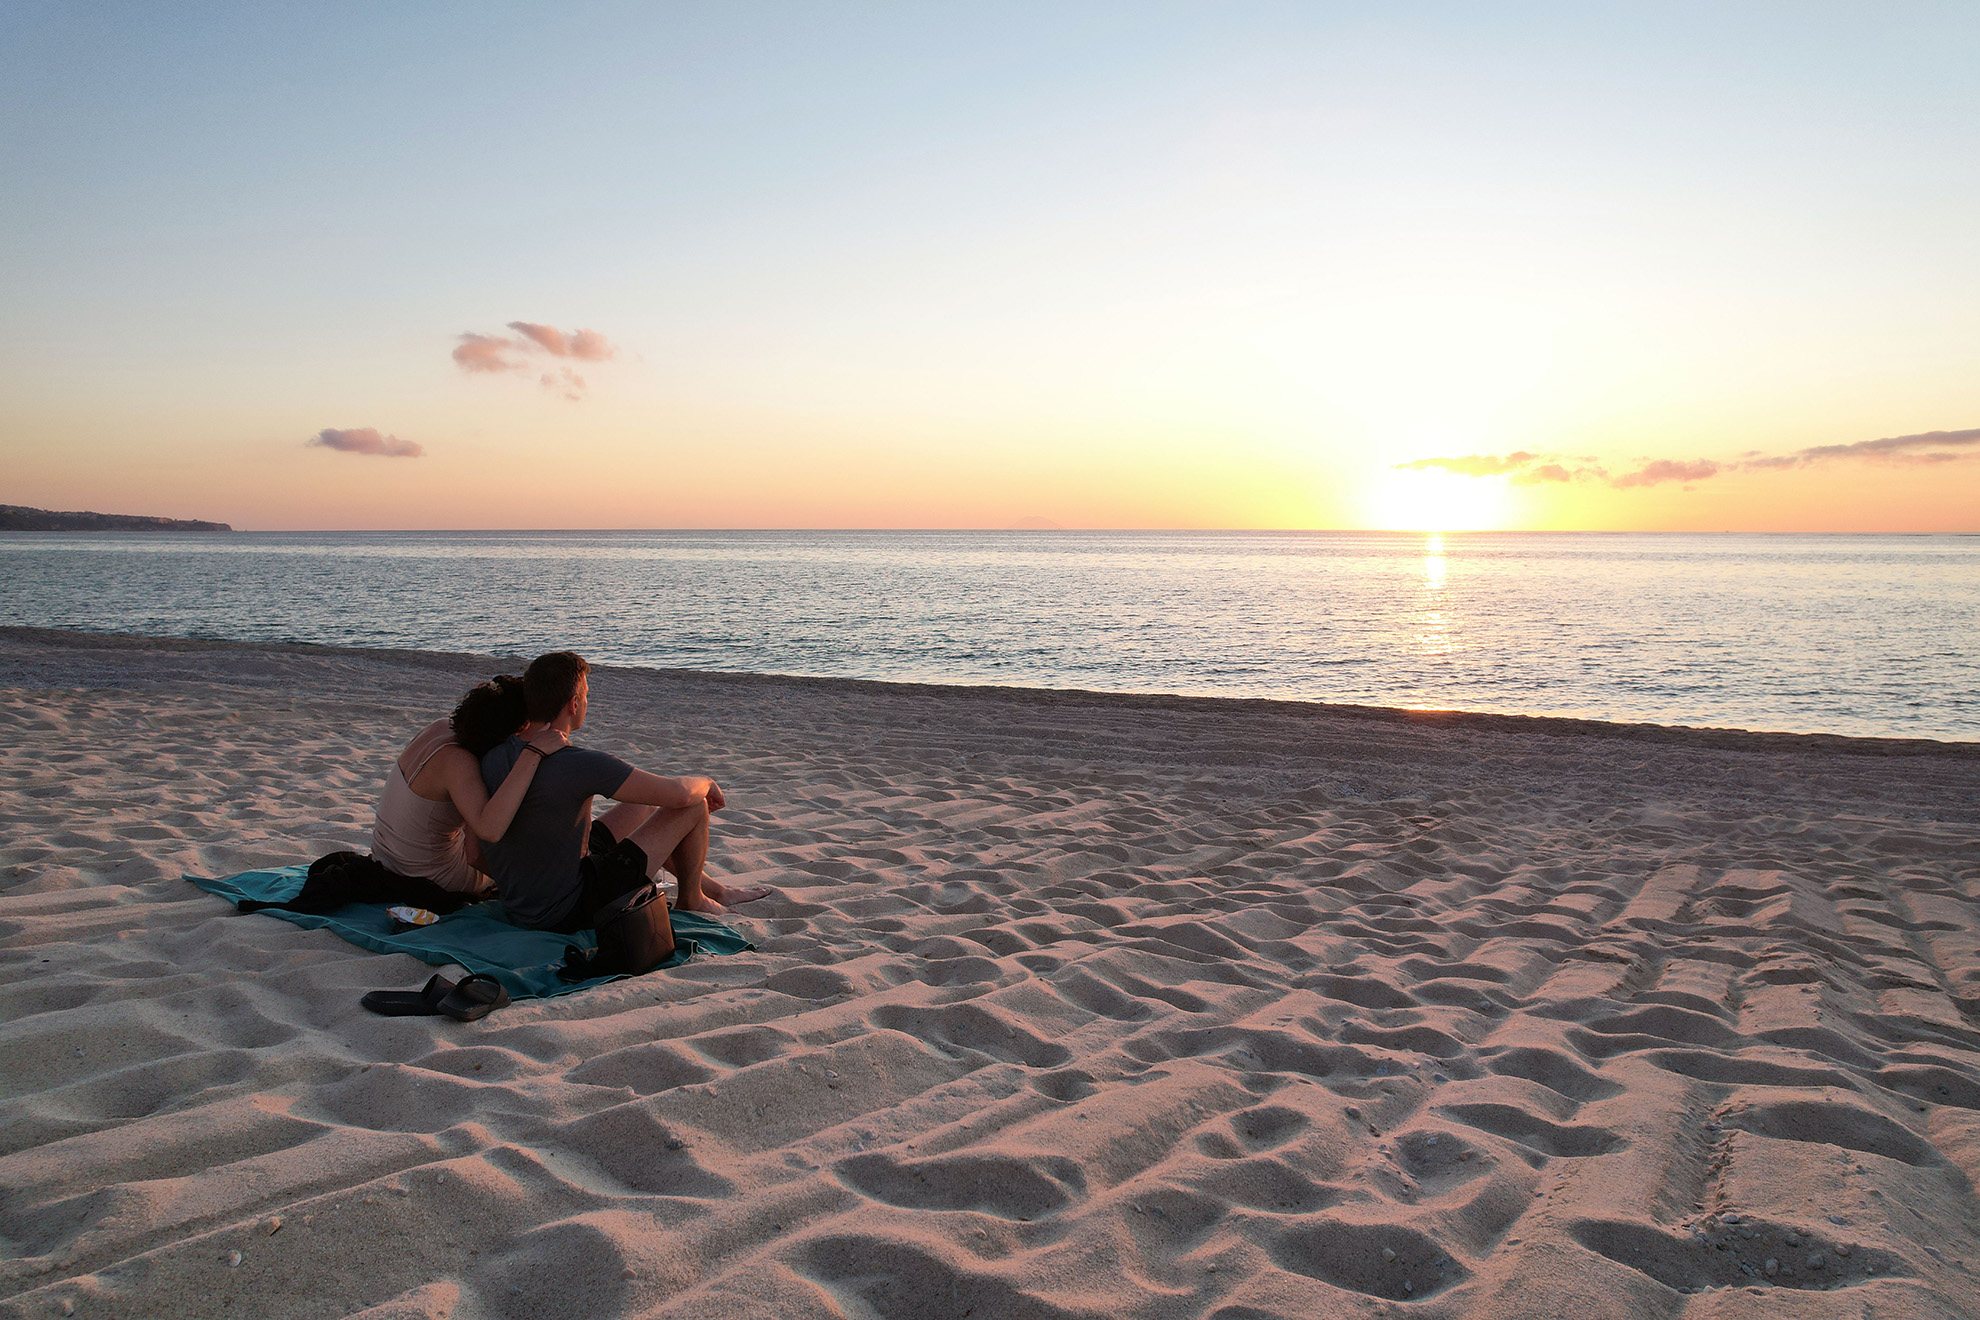 Julian, the owner of the company, sitting on the beach with his girlfriend, both enjoying the sunset. This photo captures a happy and serene moment, reflecting on their sabbatical, creating a lasting memory.